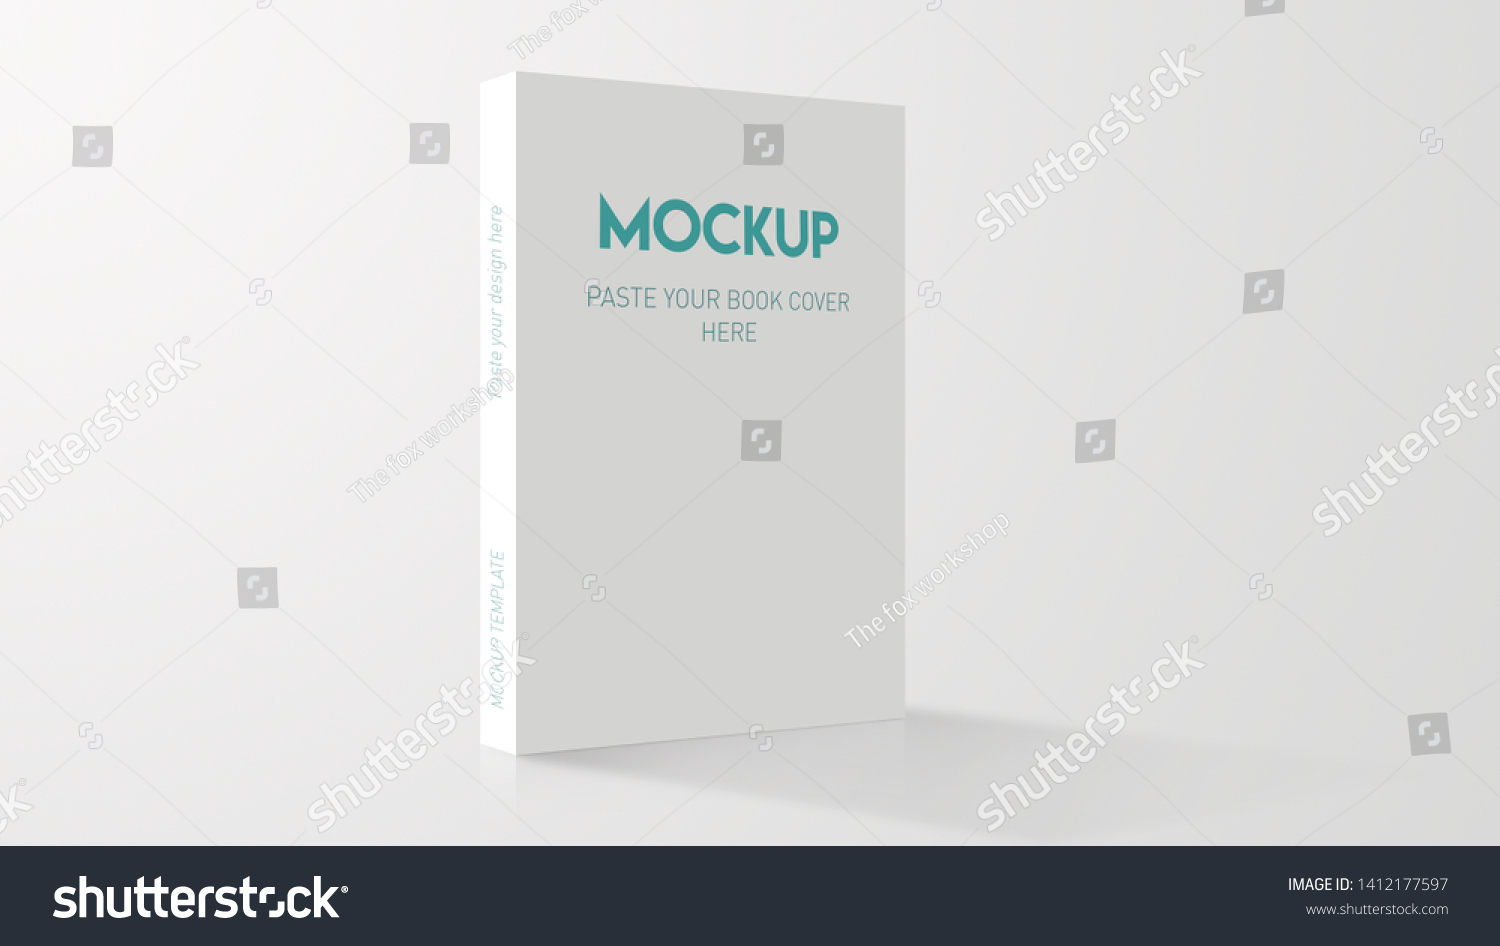 book cover template, clean mock up, paste your design here #1412177597